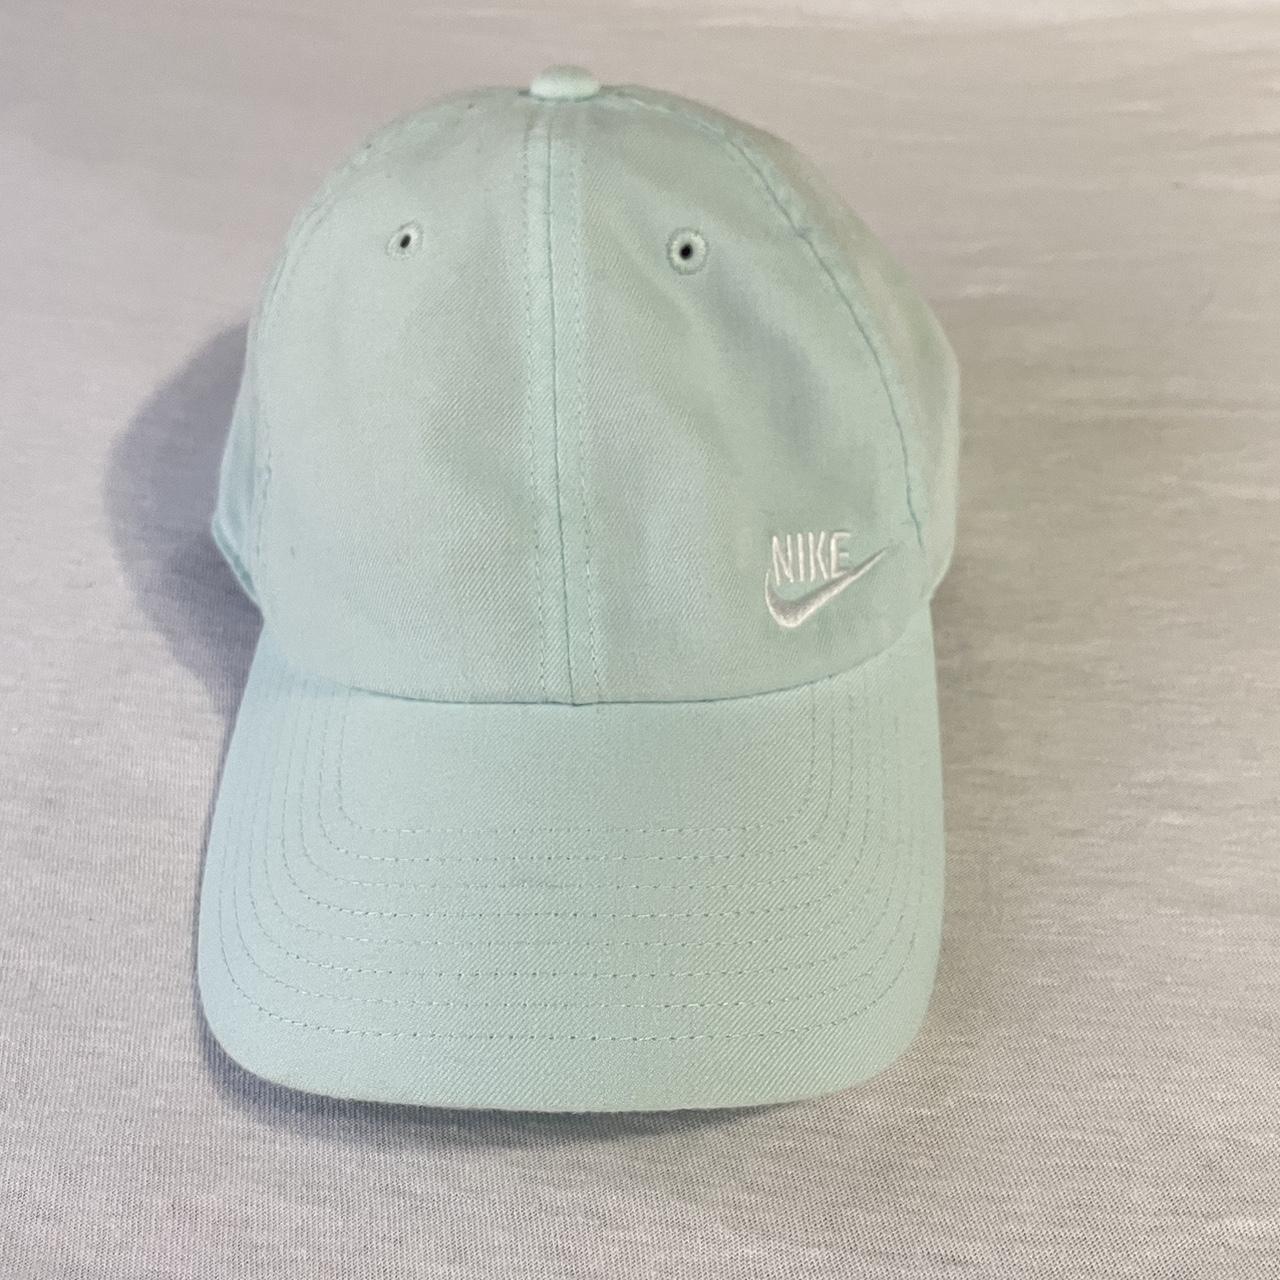 Nike light blue dri fit hat perfect for sports, the... - Depop